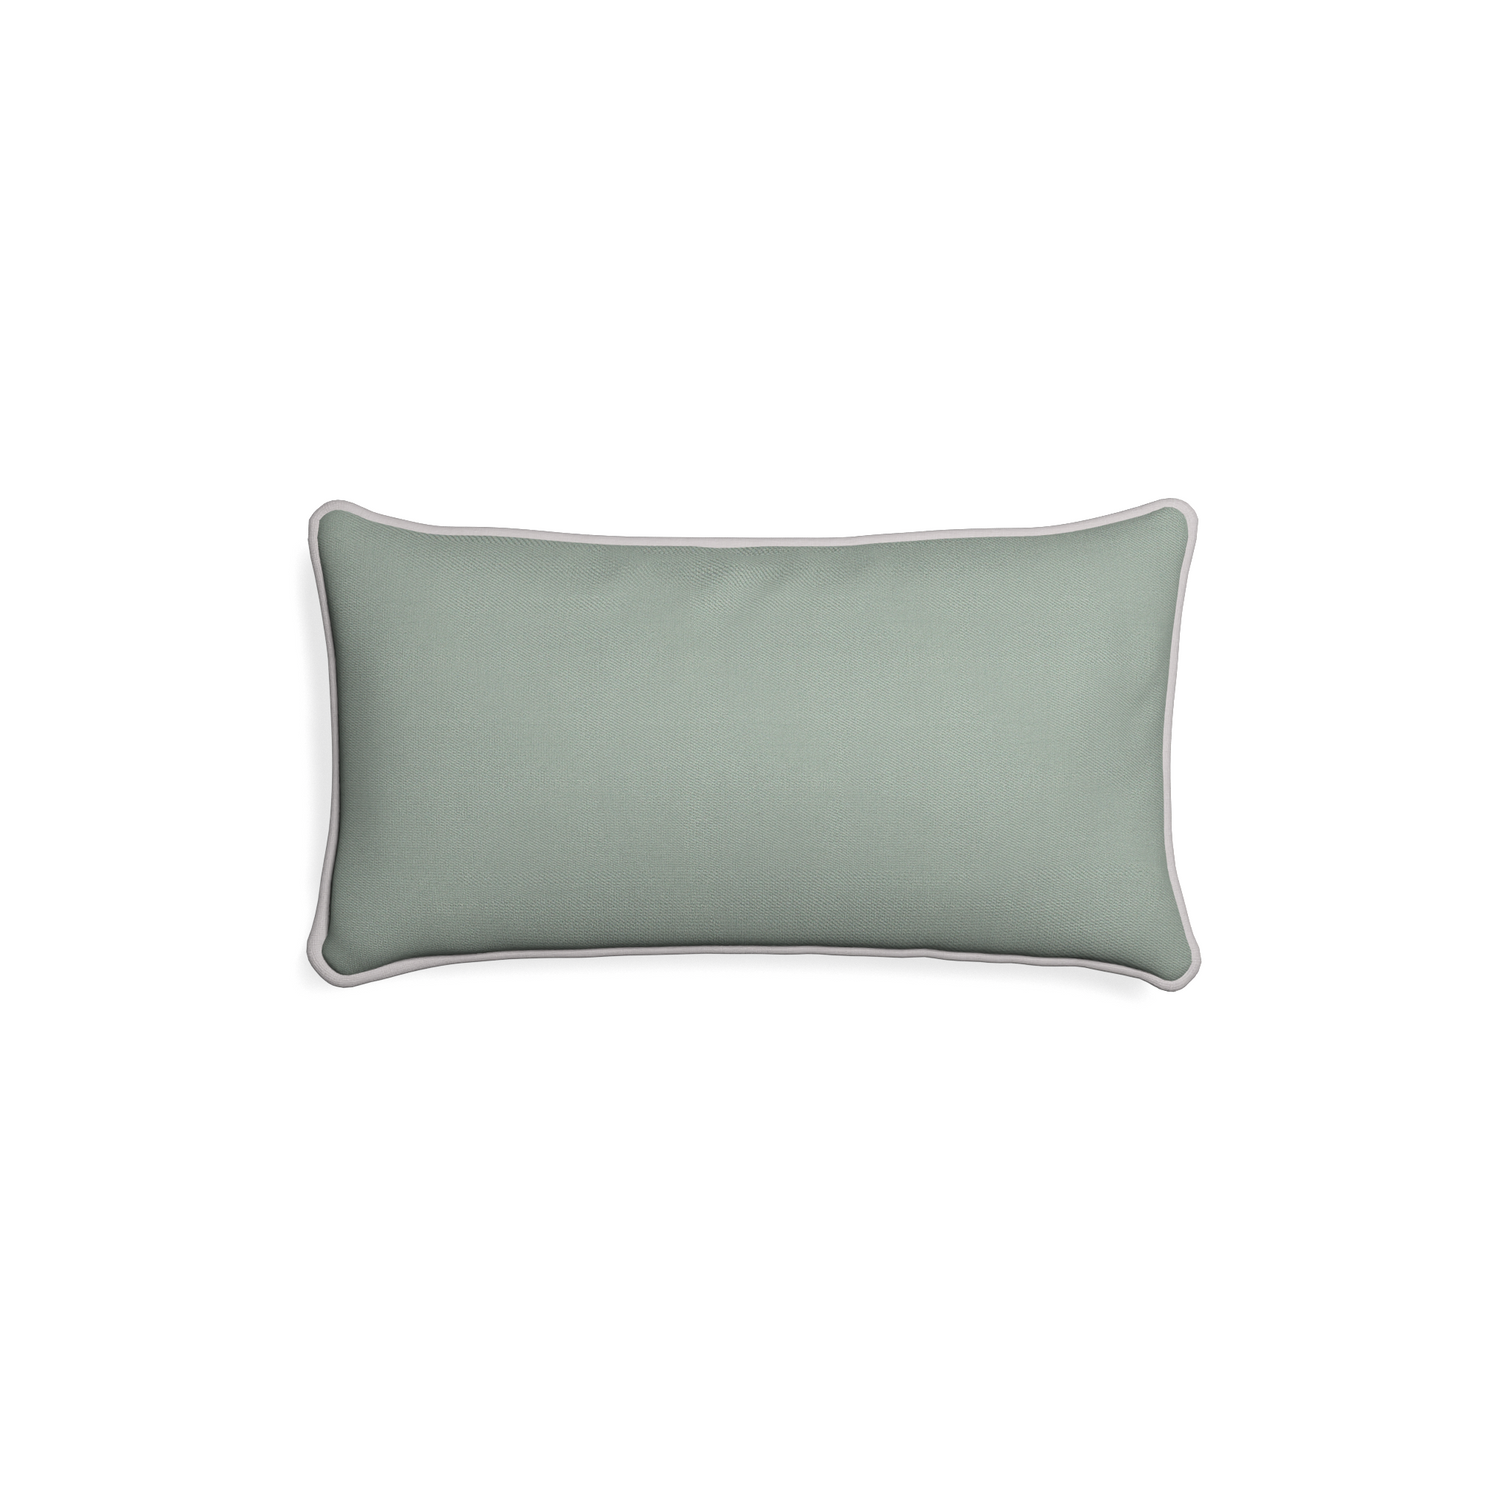 Petite-lumbar sage custom sage green cottonpillow with pebble piping on white background